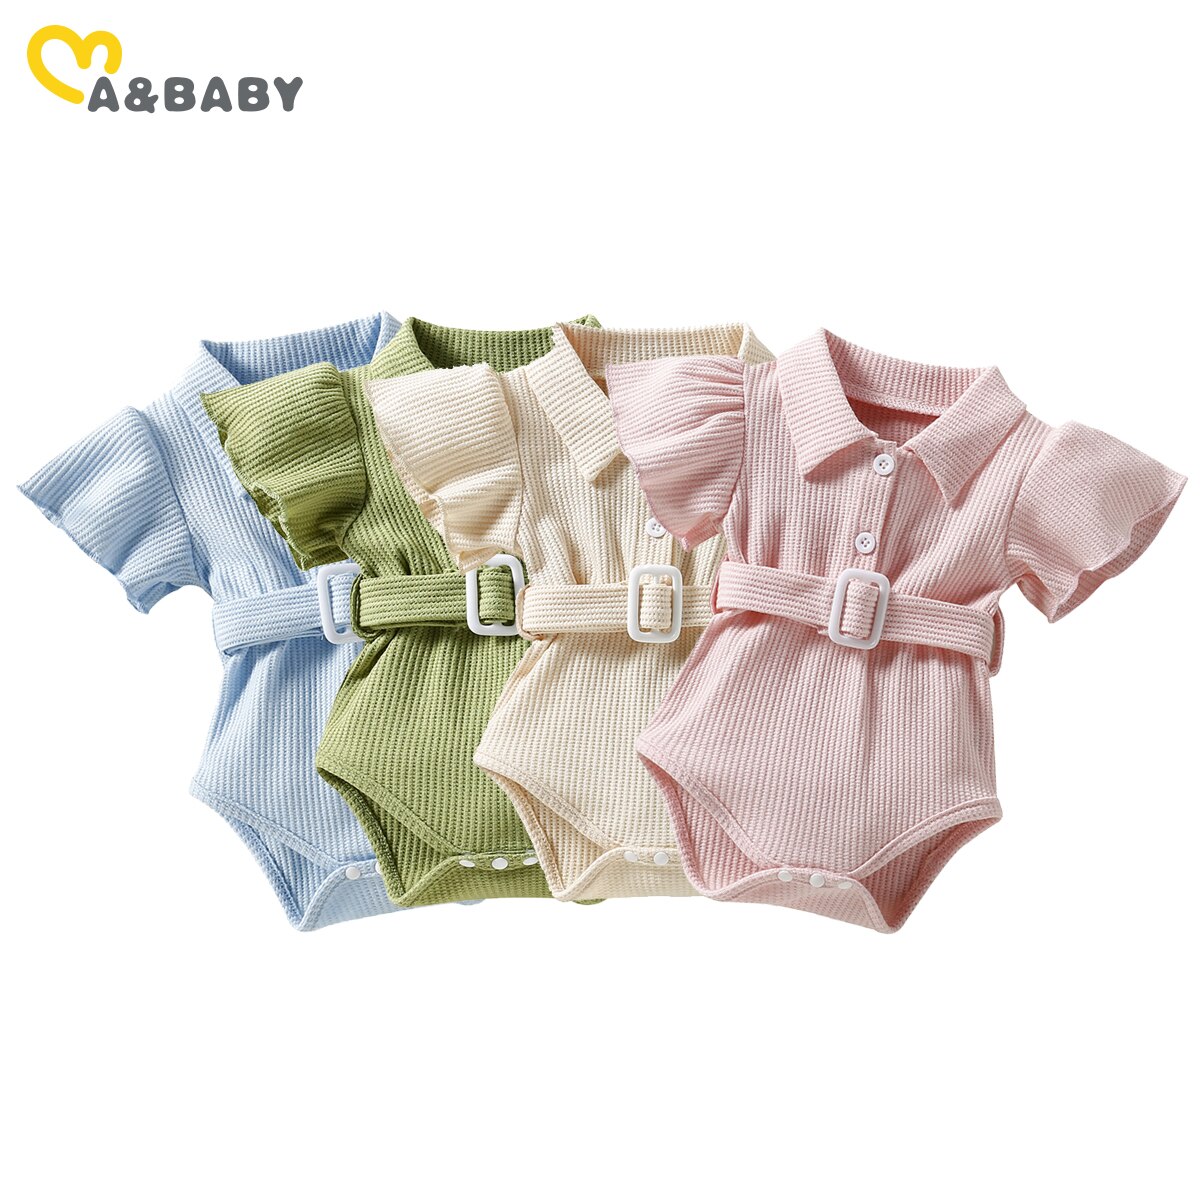 Ma-Baby-0-24M-Newborn-Infant-Baby-Girls-Romper-Ruffles-Jumpsuit-With-Belt-Playsuit-Summer-Clothing-5